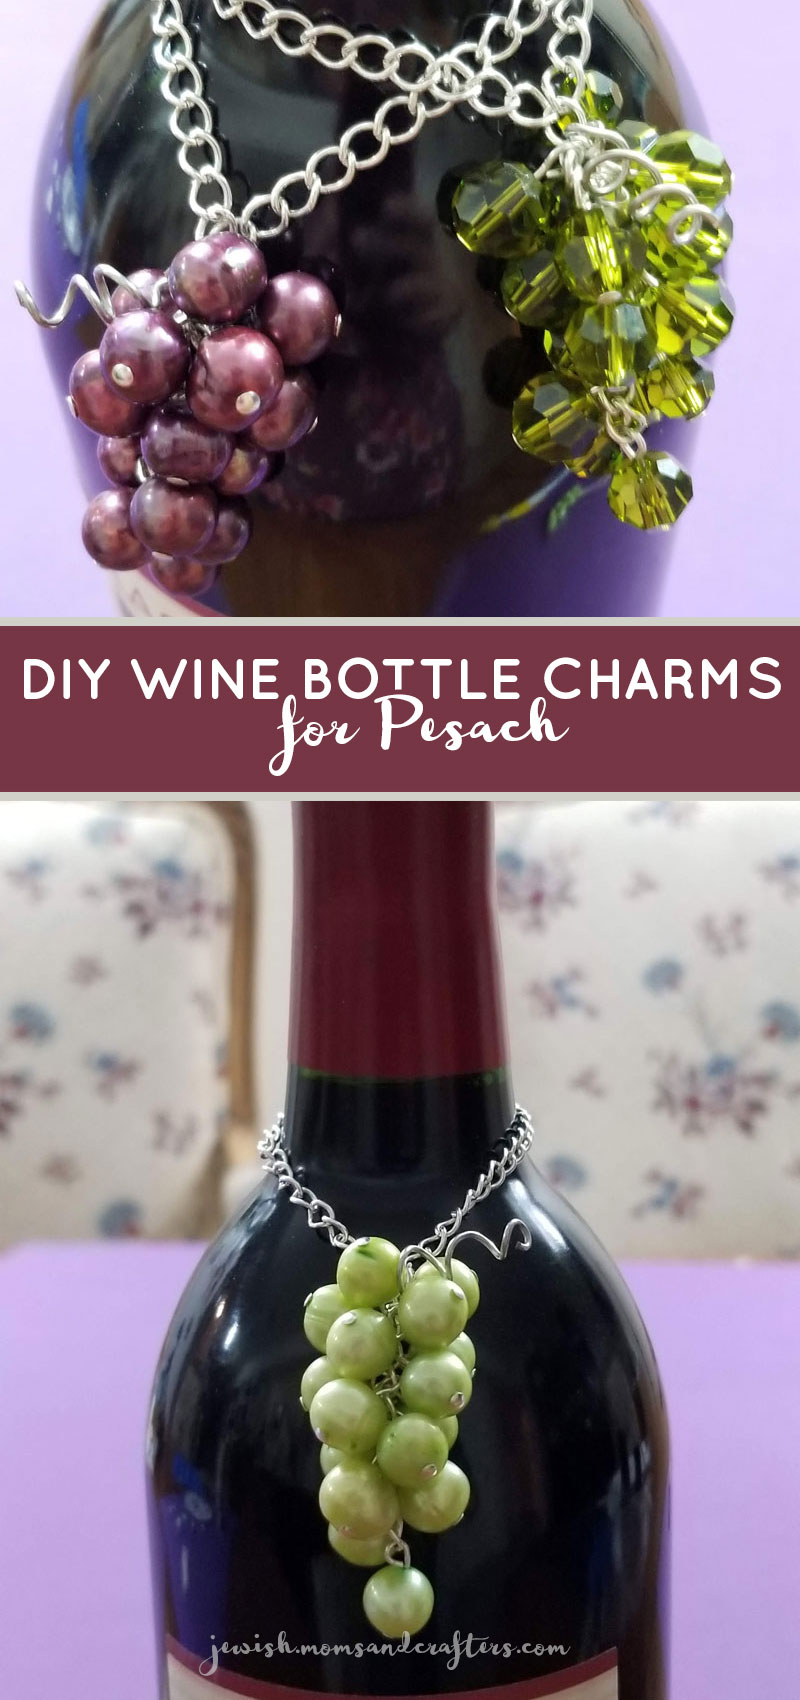 Click how to learn how to make diy wine charms - a beatiful Passover table decoration idea! This sweet pesach seder decor is fun to DIY and makes a great hostess gift!